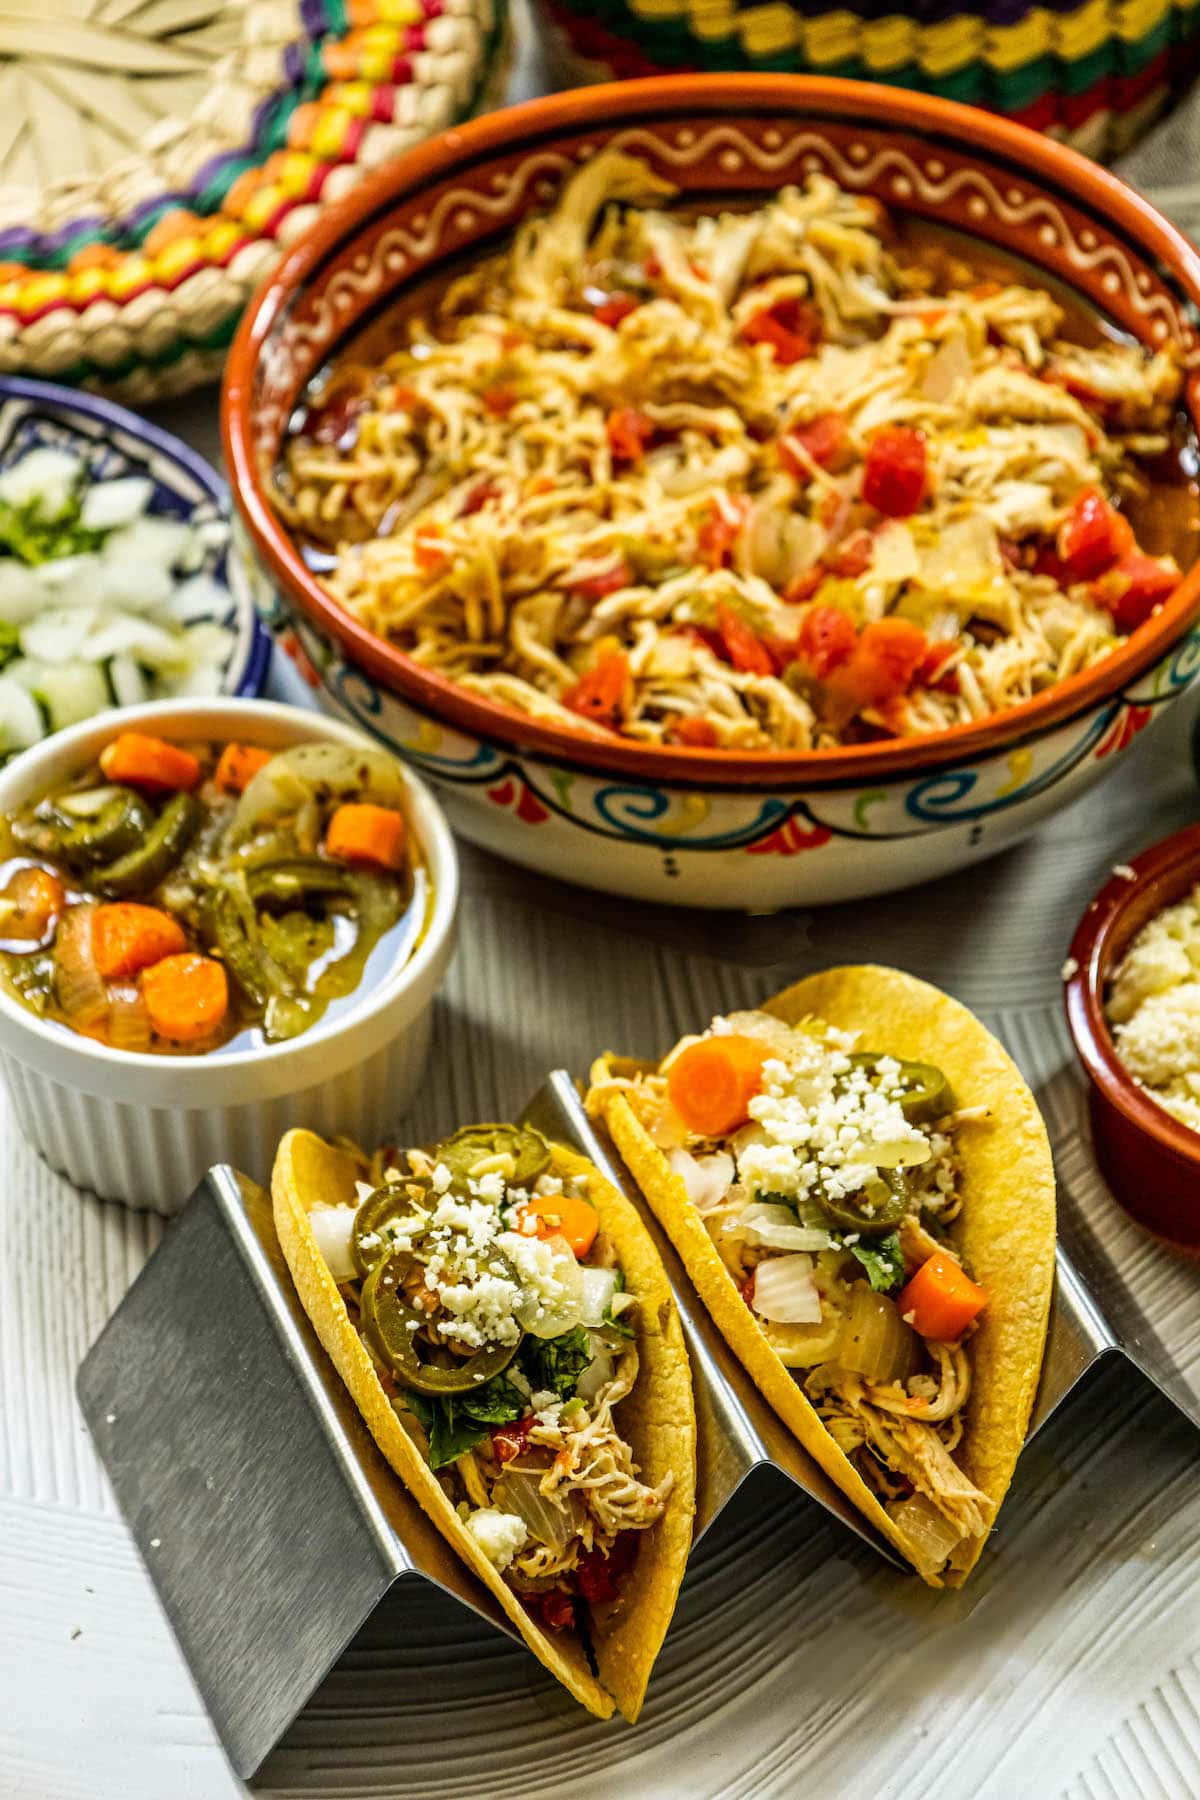 shredded chicken with tomatoes and green chile in a telavera bowl next to chicken tacos in a taco stand and a bowl of jalapeno and carrot salsa, a bowl of crumbled white cheese, some limes, a bowl of diced onions, and a bowl of tortillas on a table